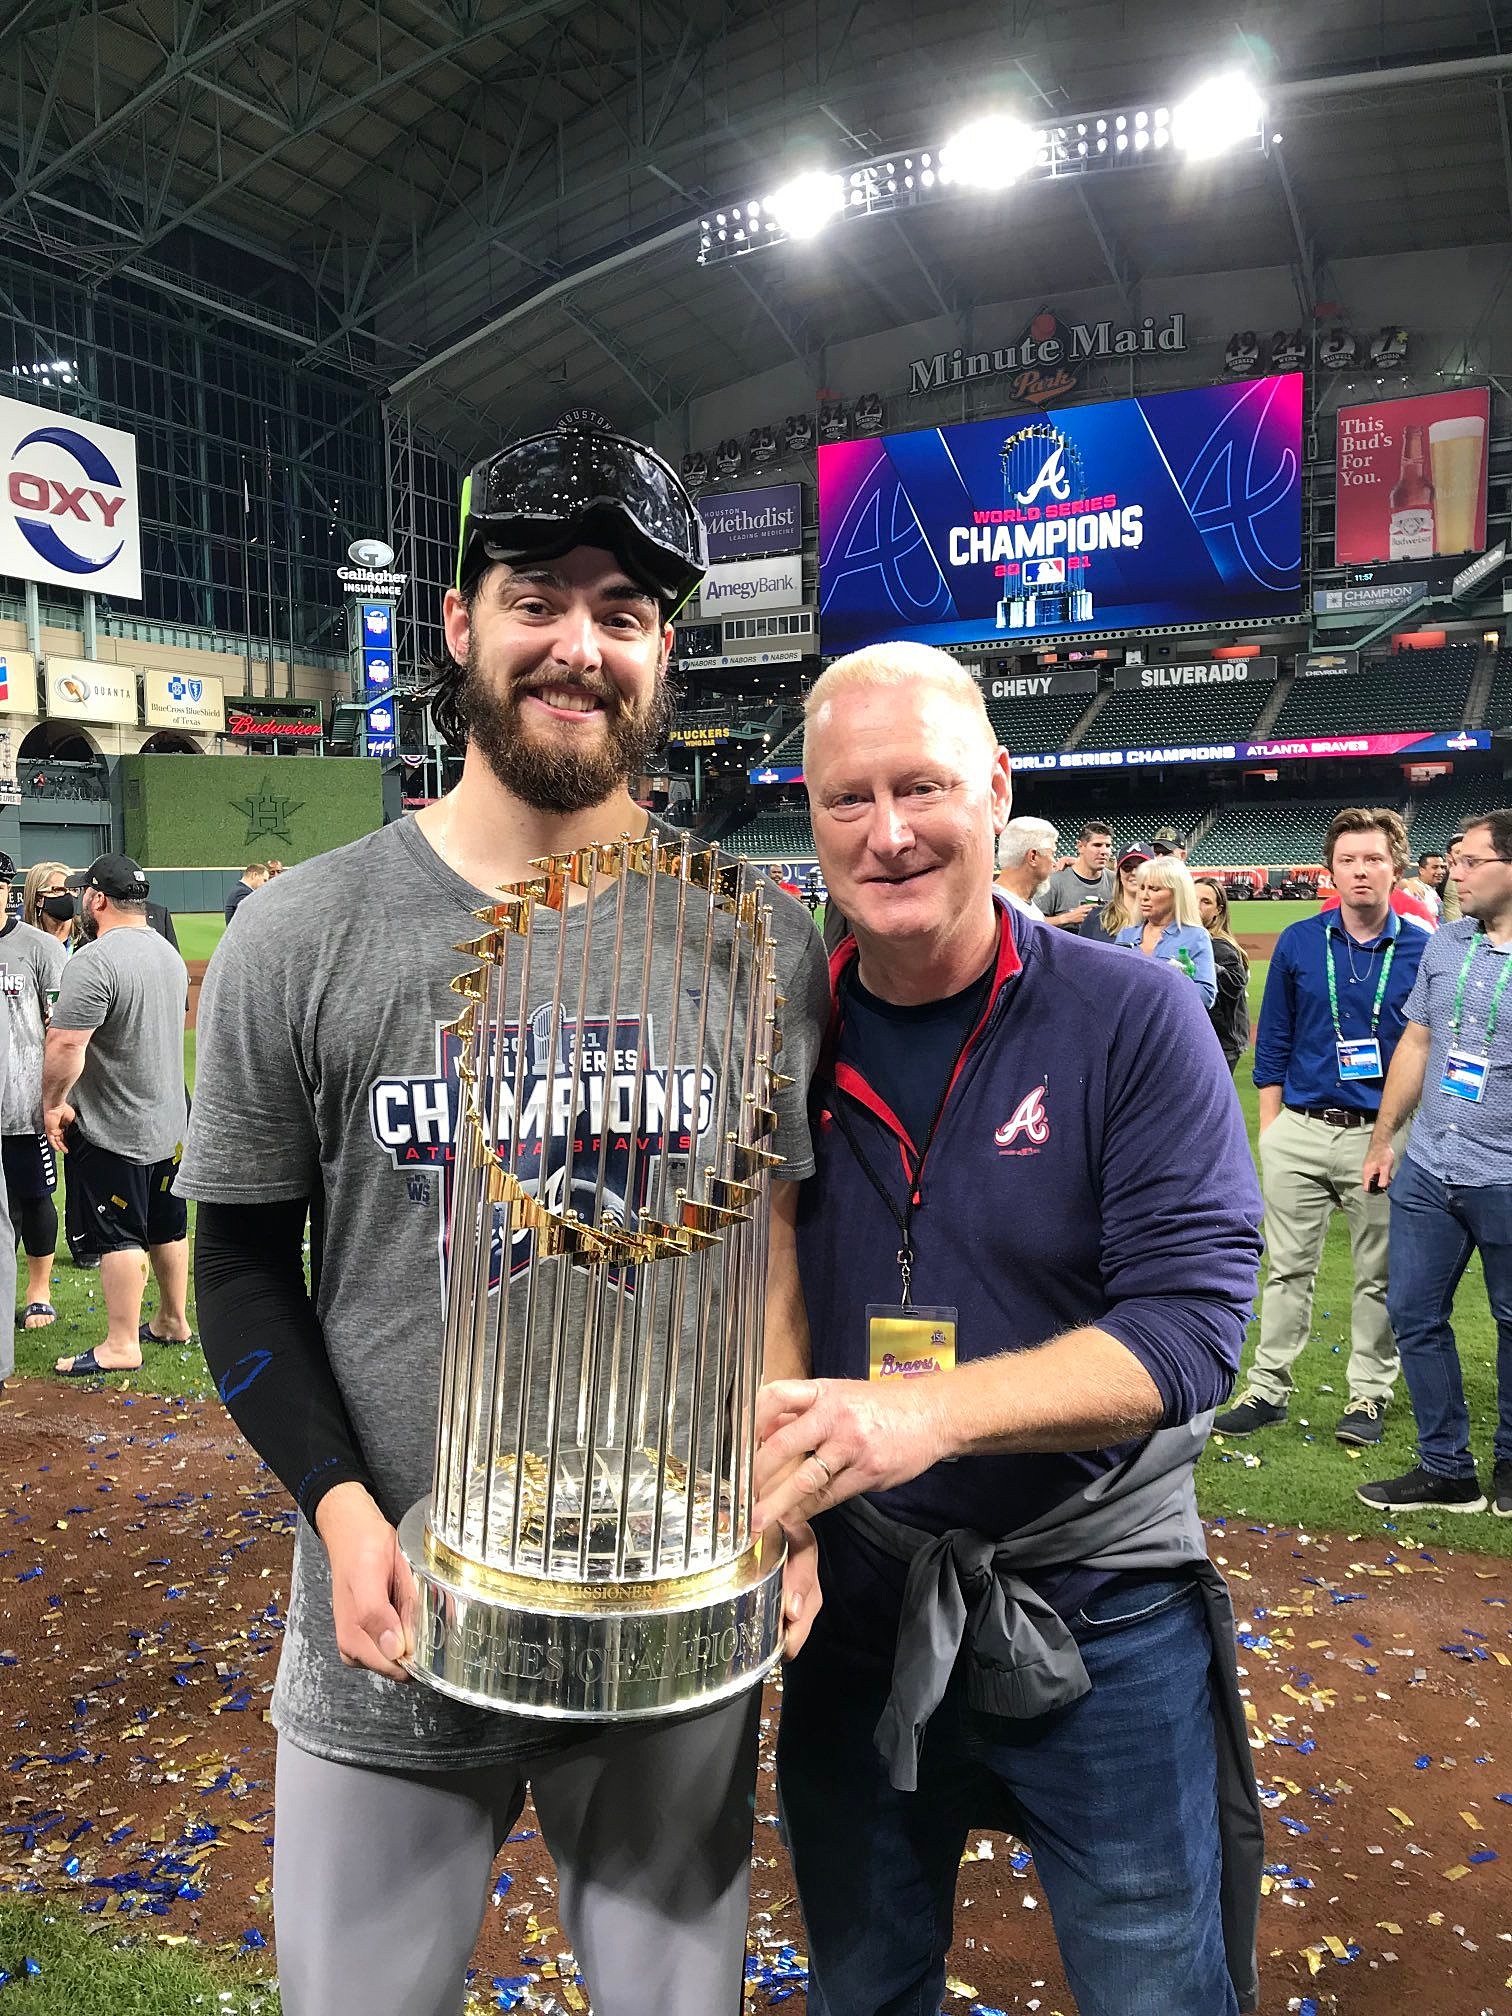 World Series a father-and-son family affair for Snitkers